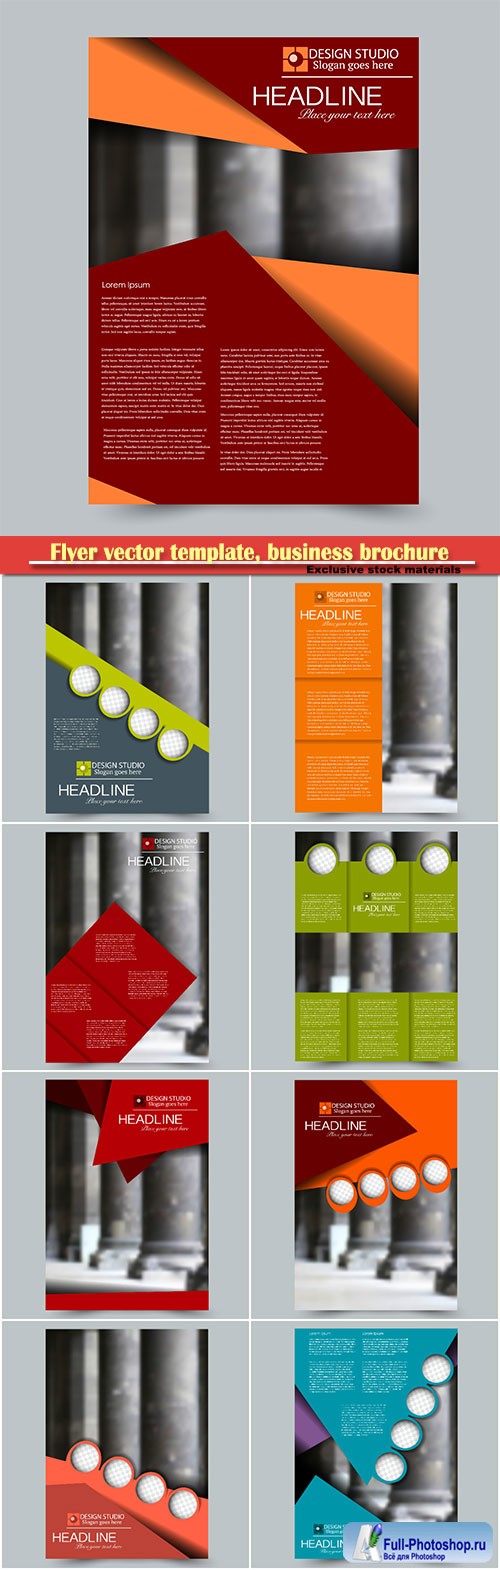 Flyer vector template, business brochure, magazine cover # 39